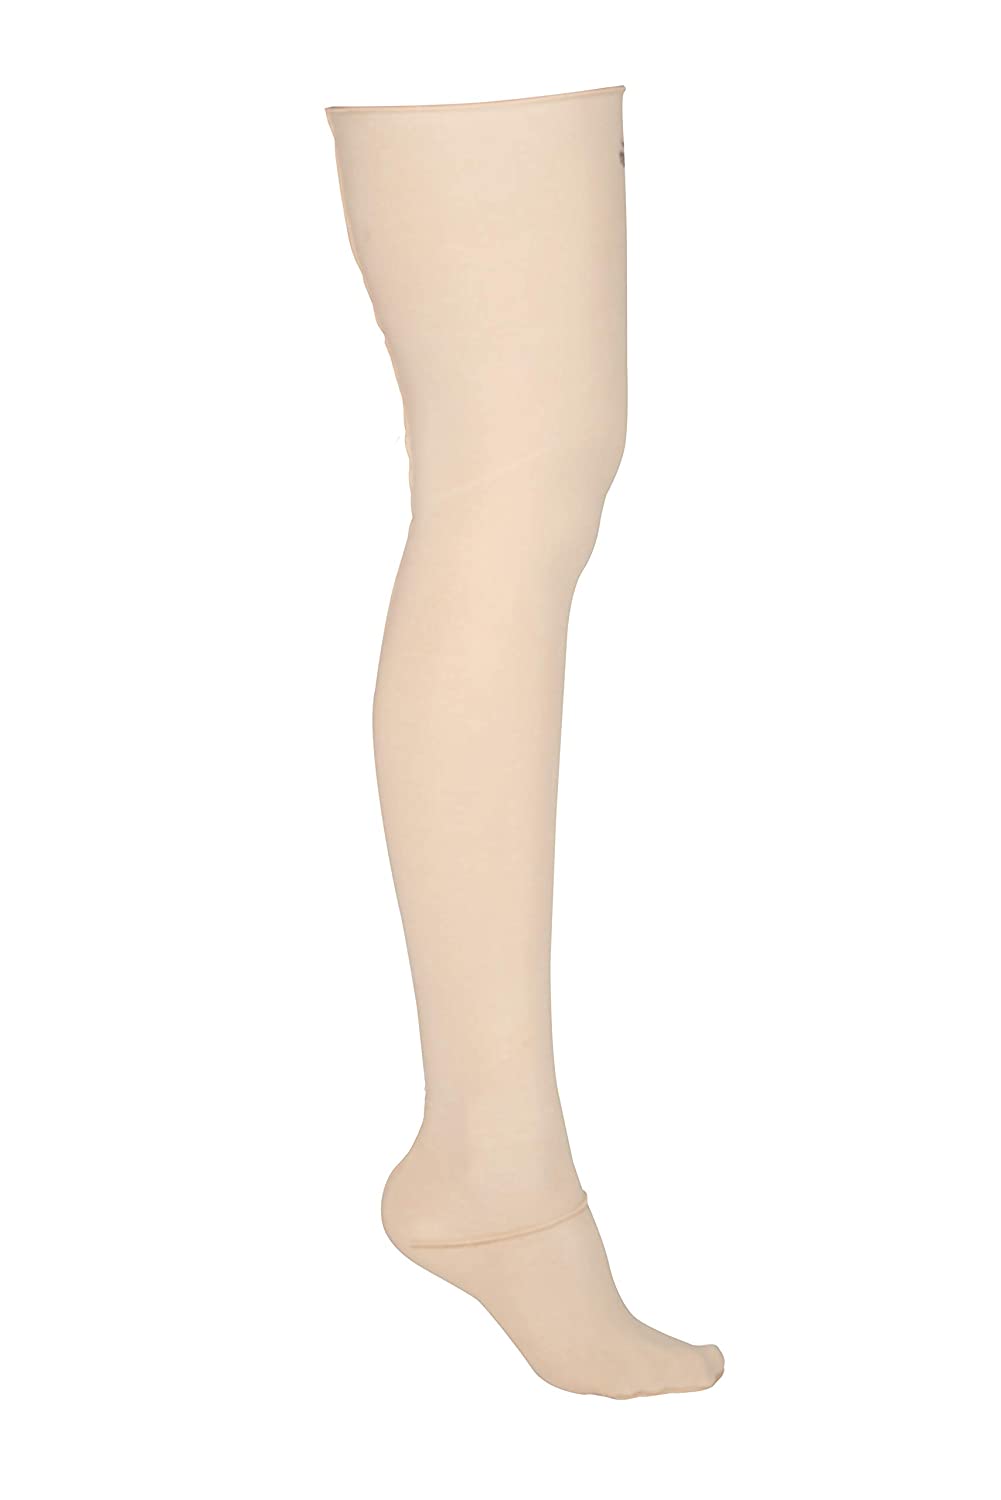 AHS Graduated 20-30 mmHg Compression Stocking for Men and Women-7